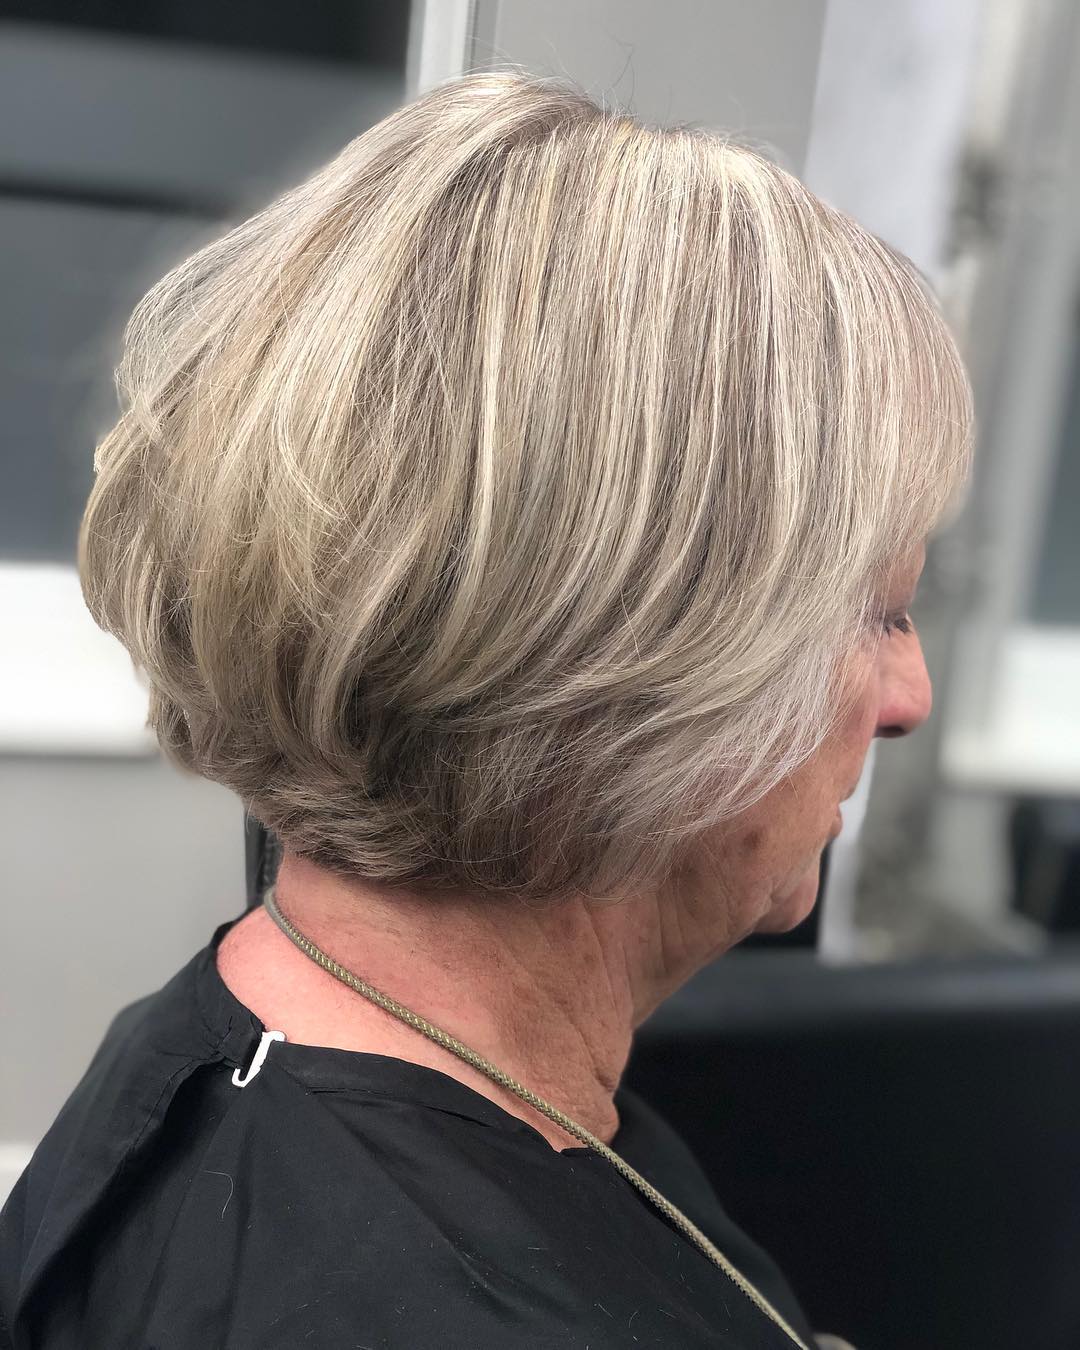 20 Elegant Hairstyles for Women over 70 to Pull Off in 2020